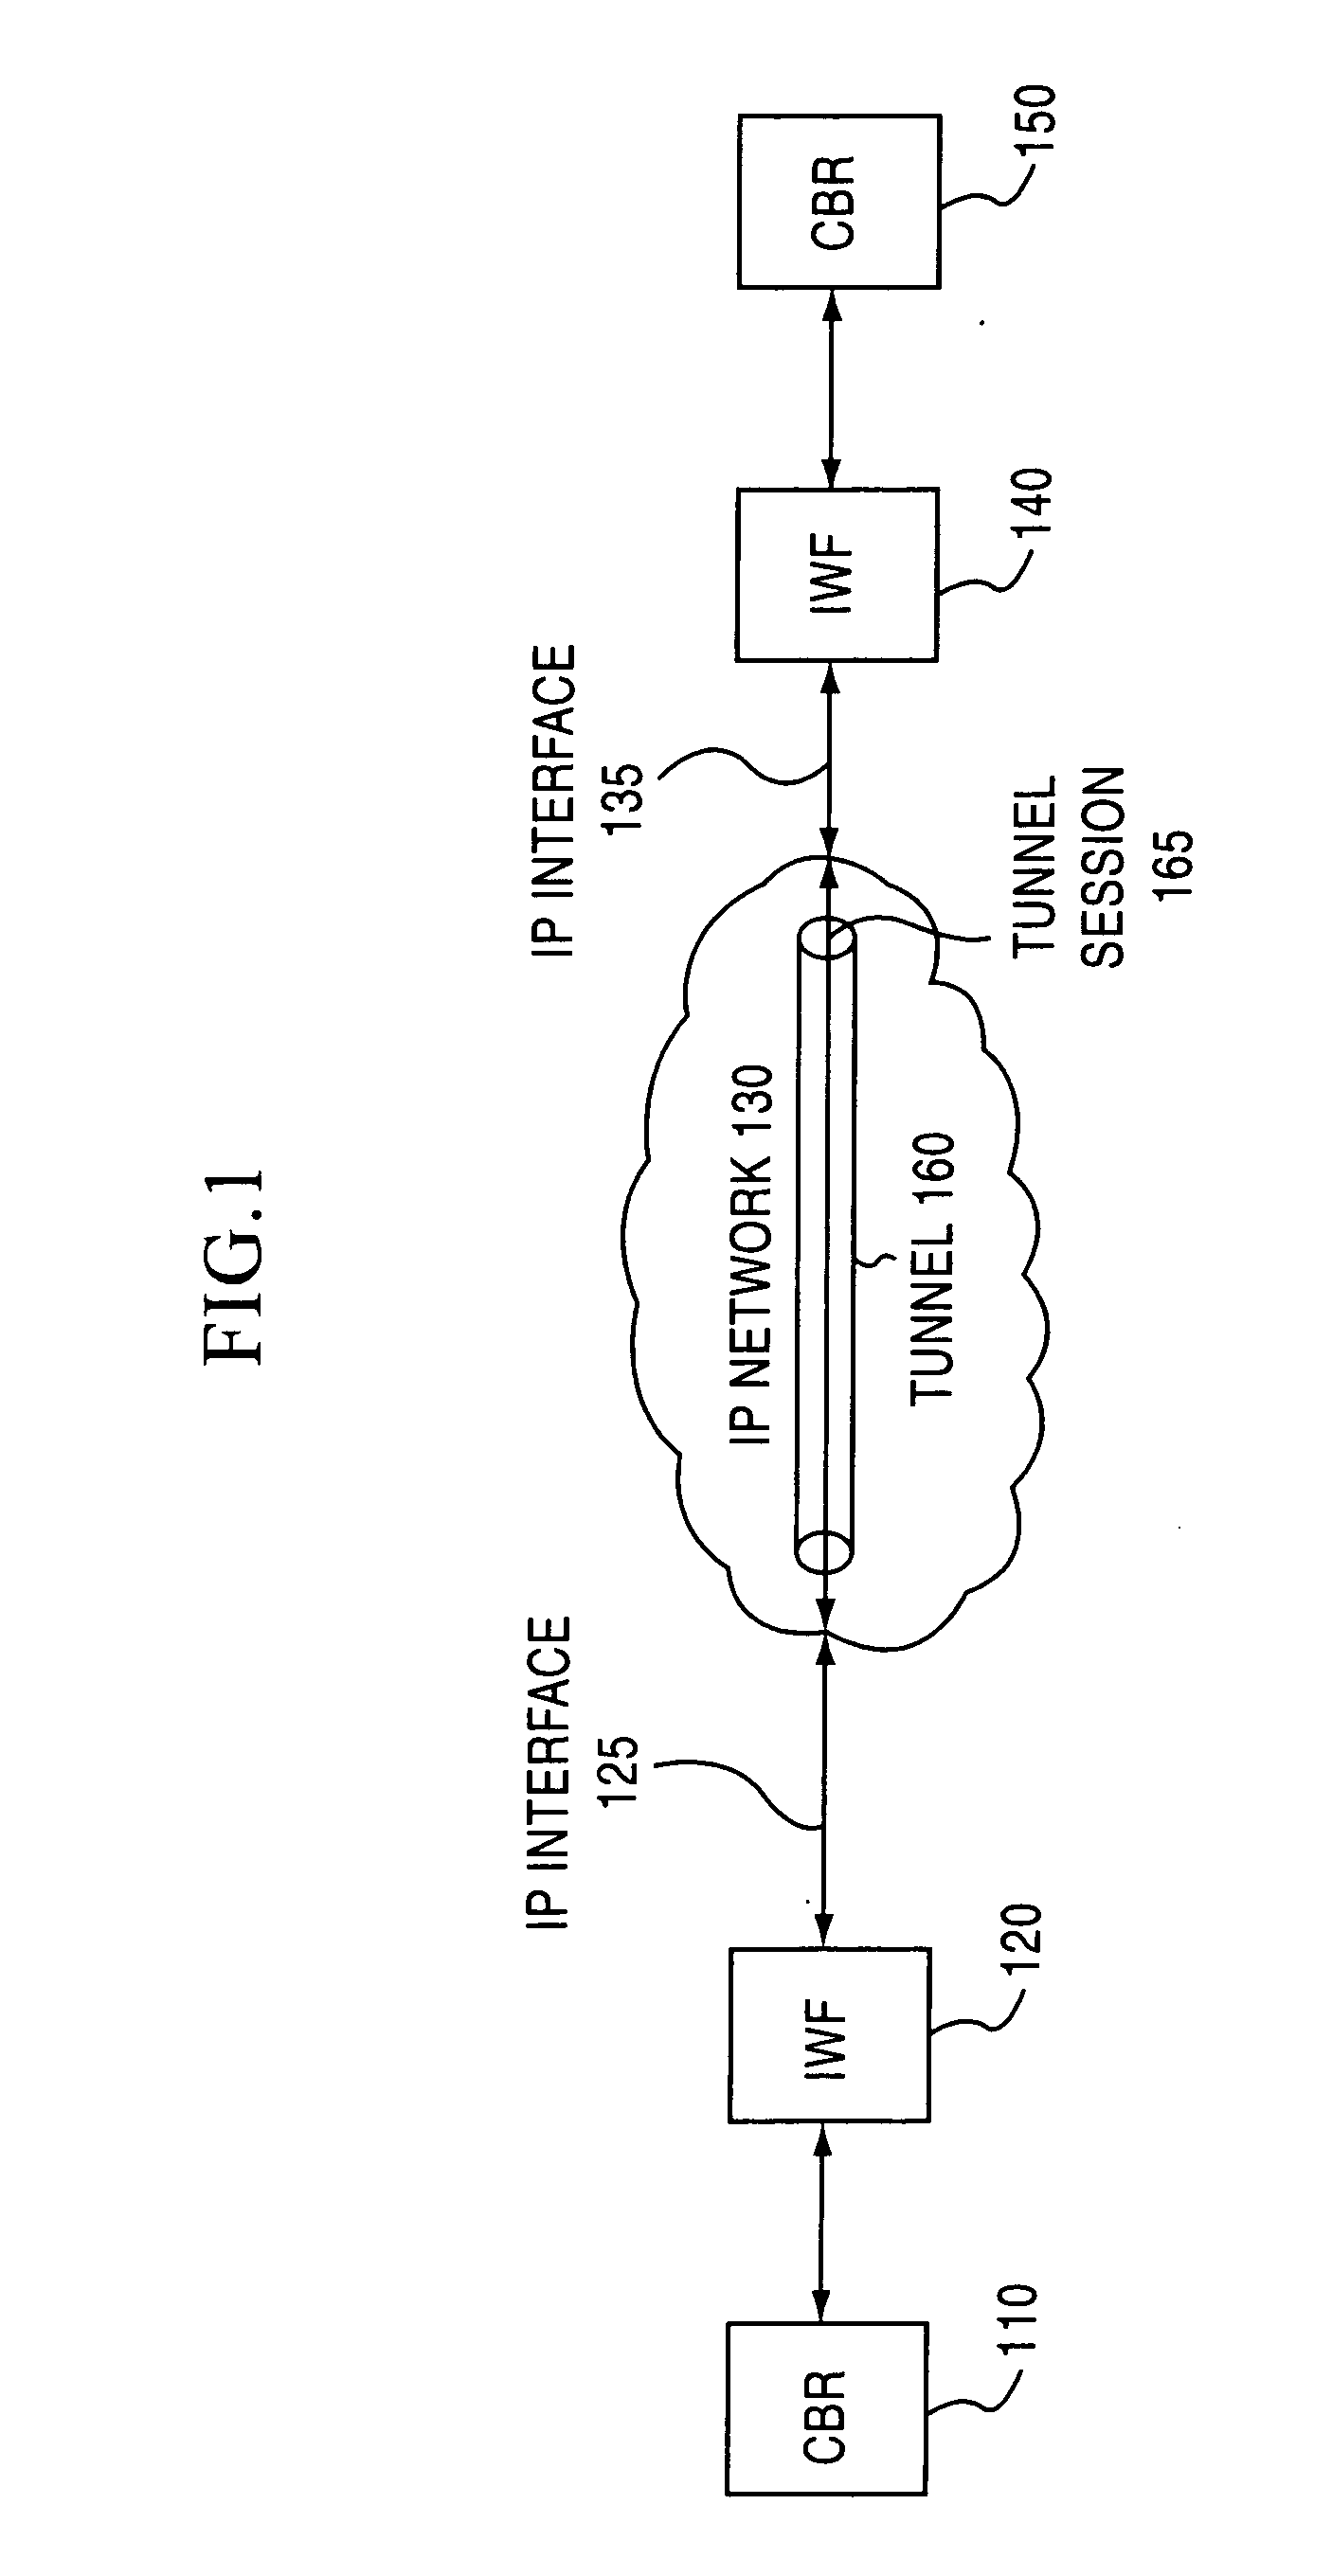 Jitter buffer for a circuit emulation service over an internal protocol network